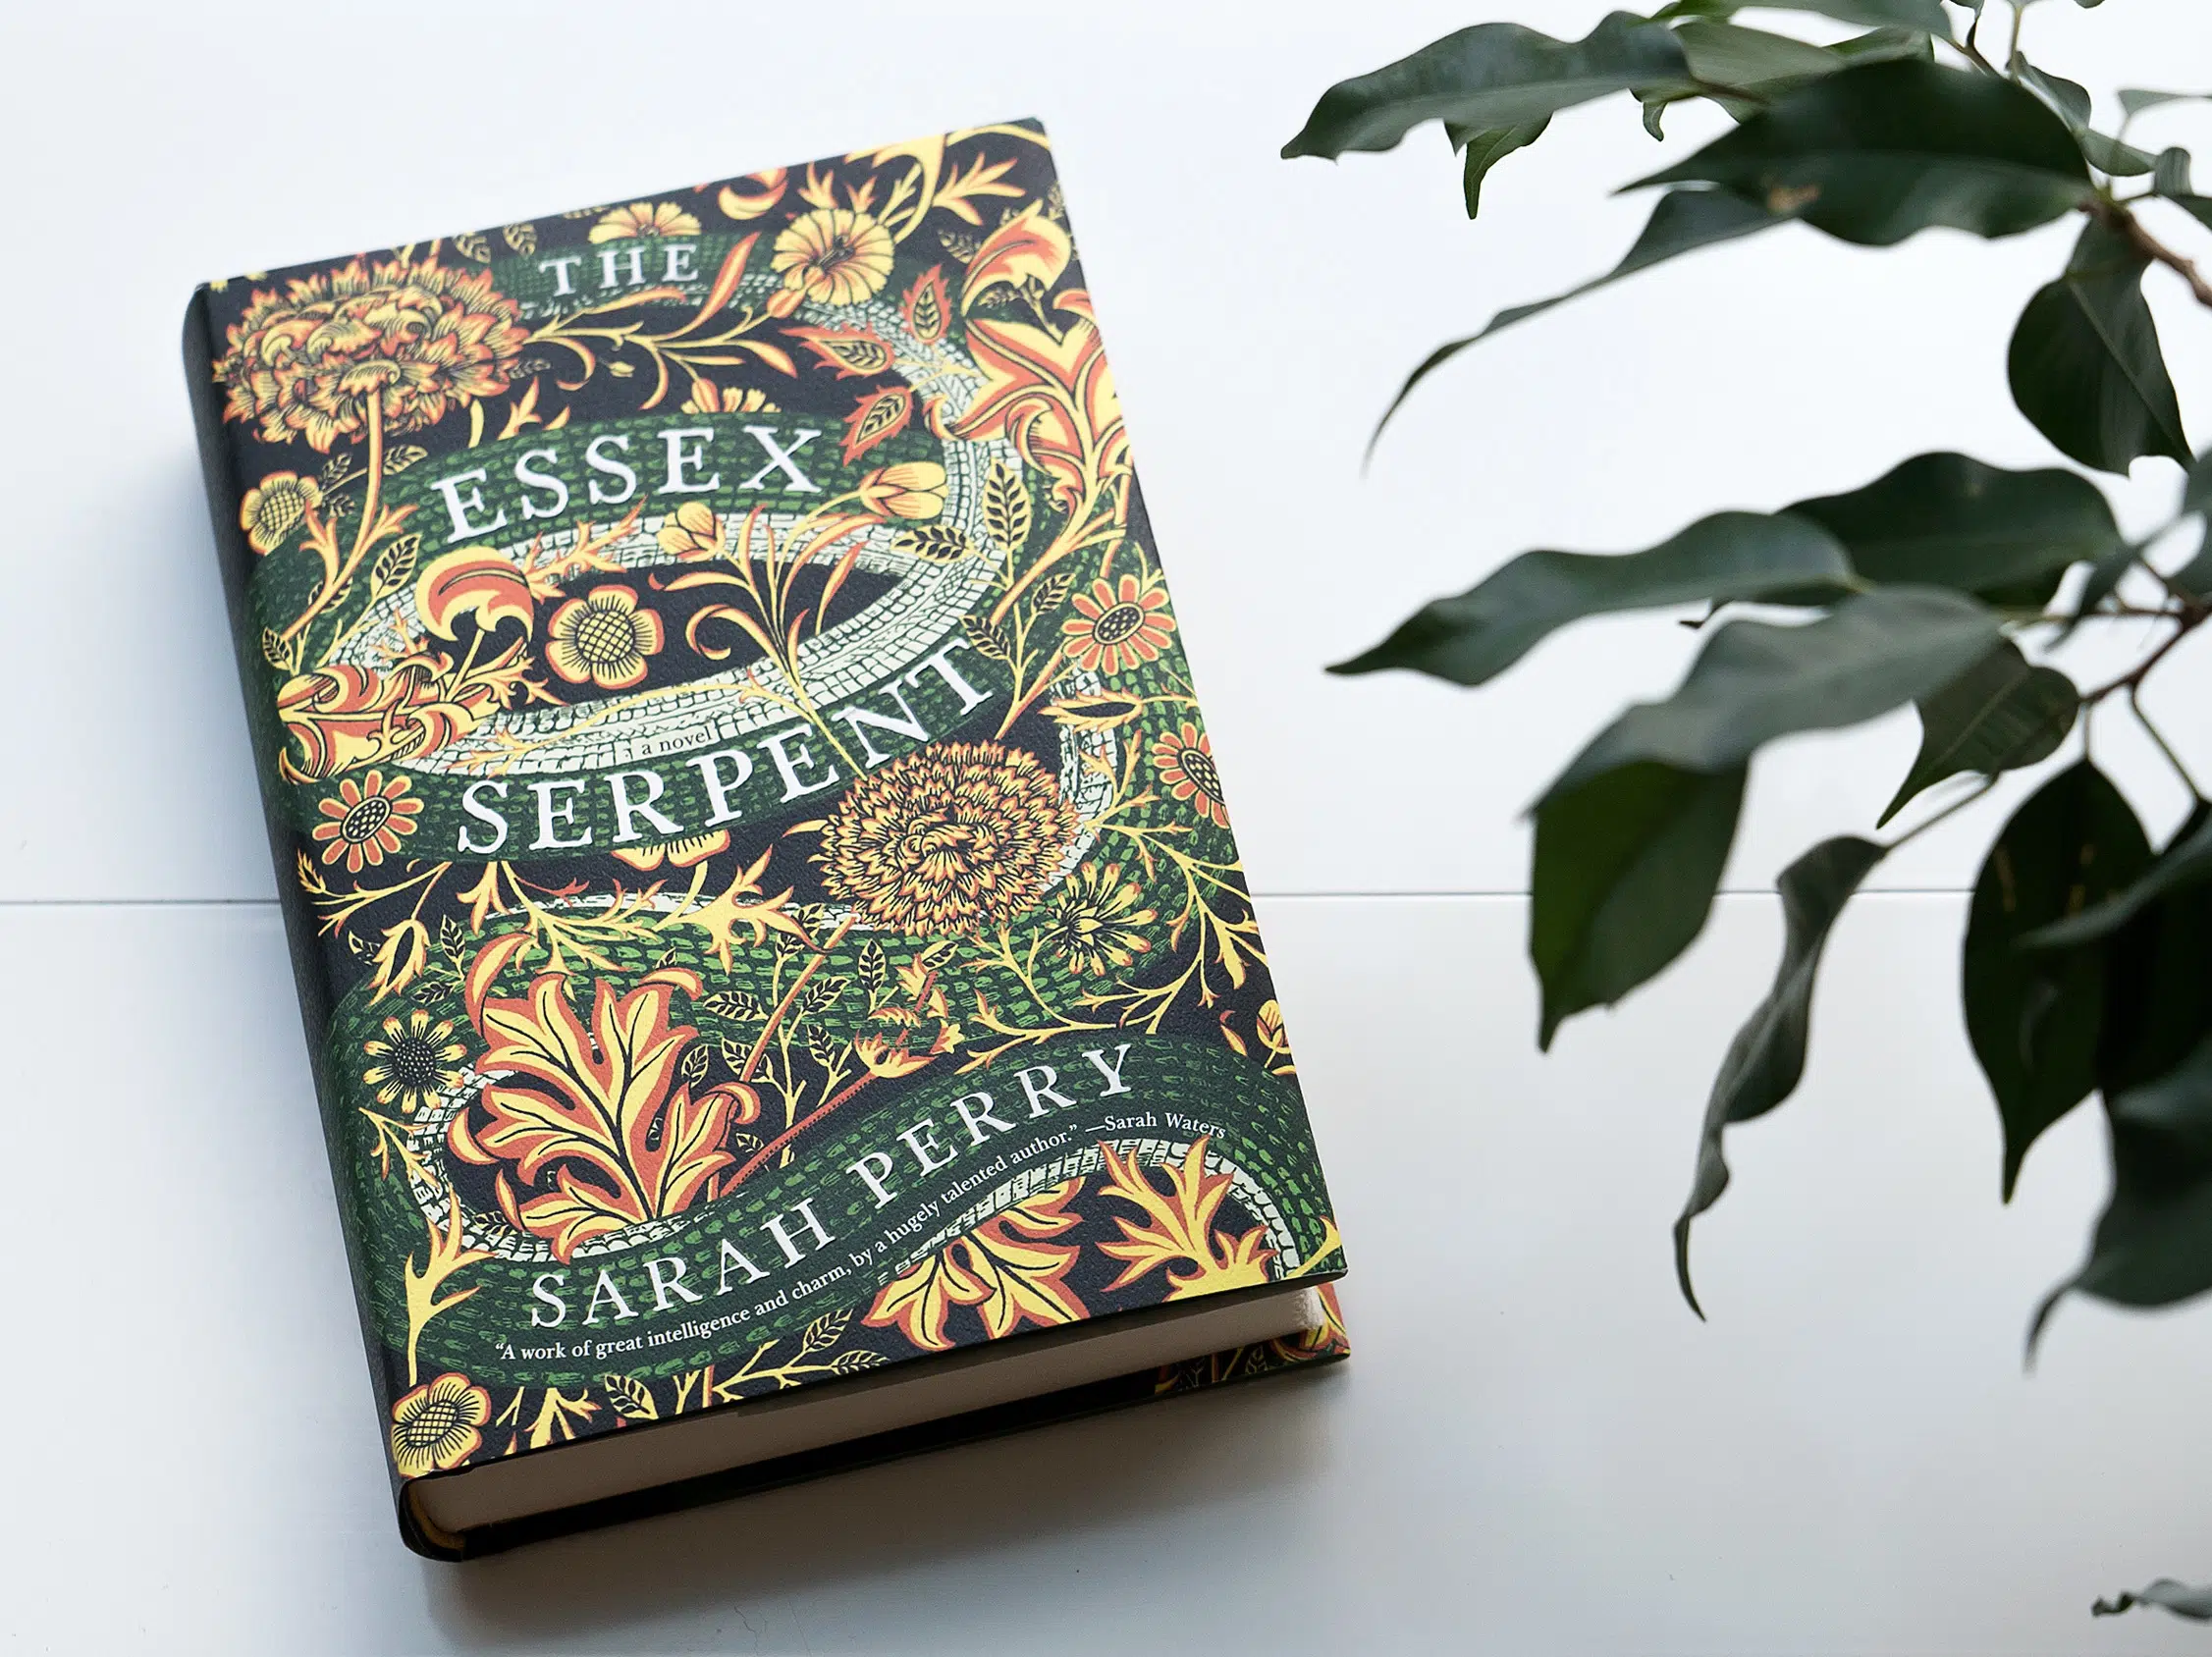 The Book of The Essex Serpent